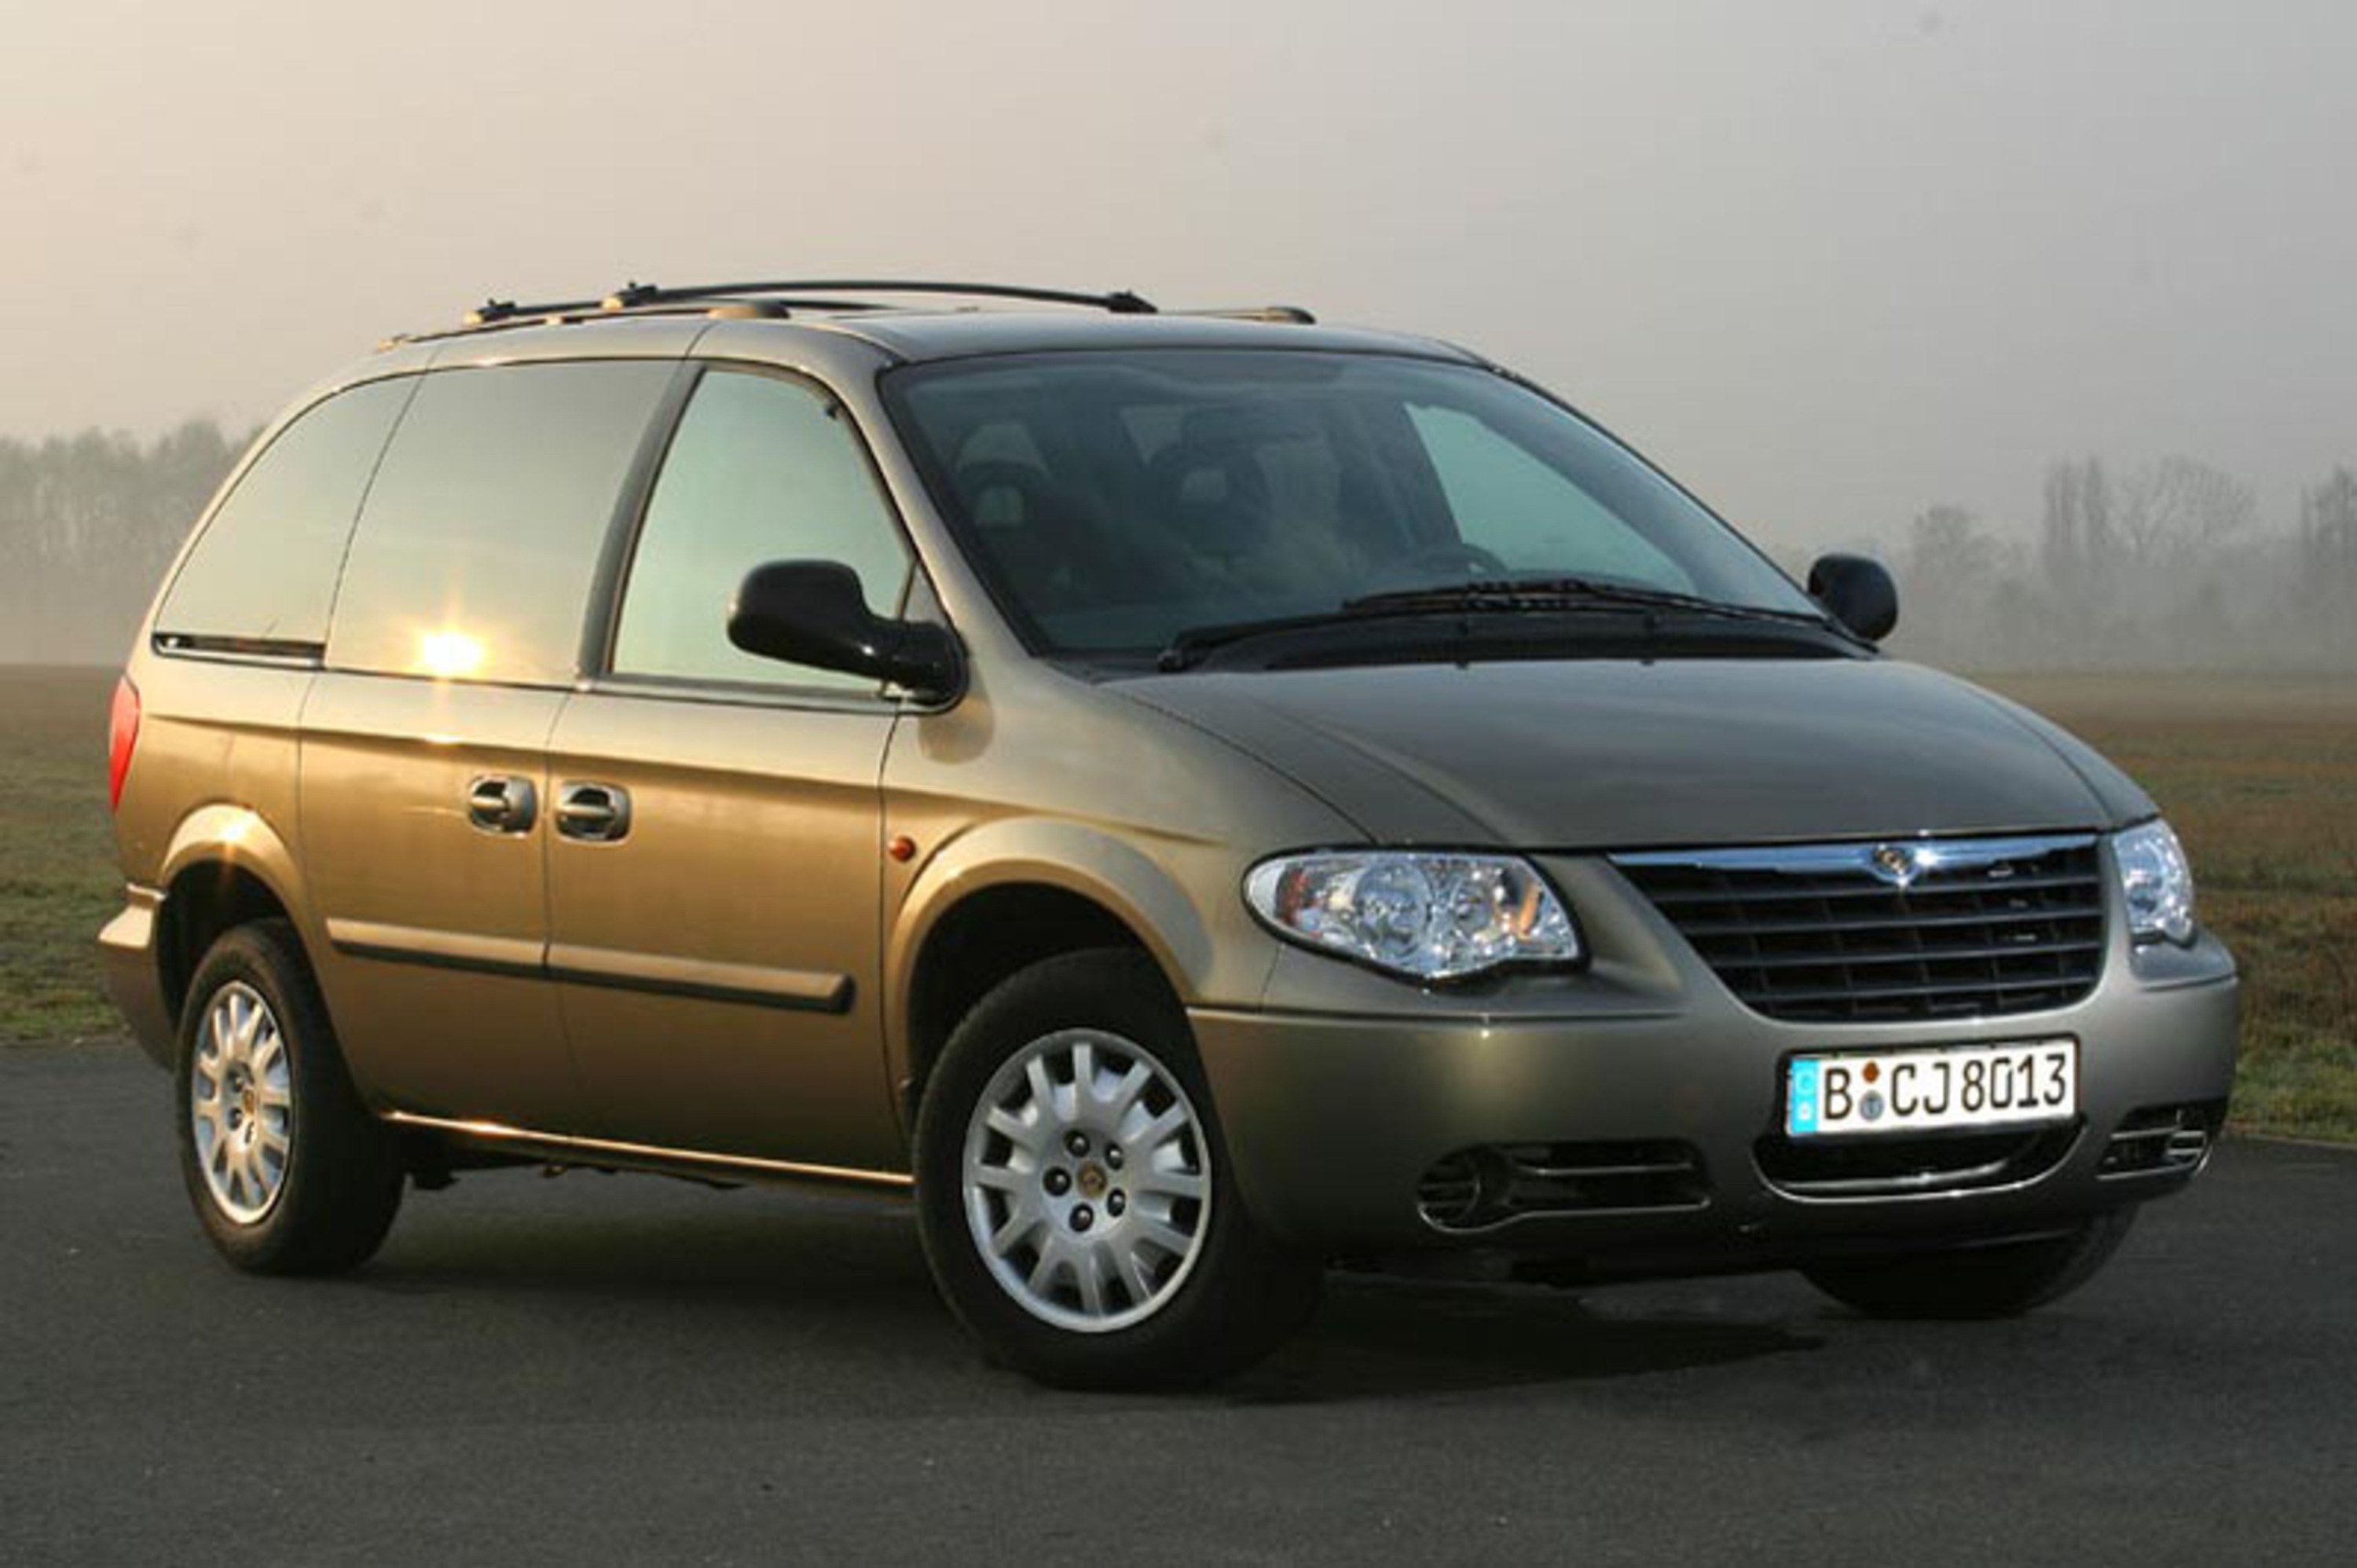 Chrysler Voyager 2.5 CRD cat LE my 04